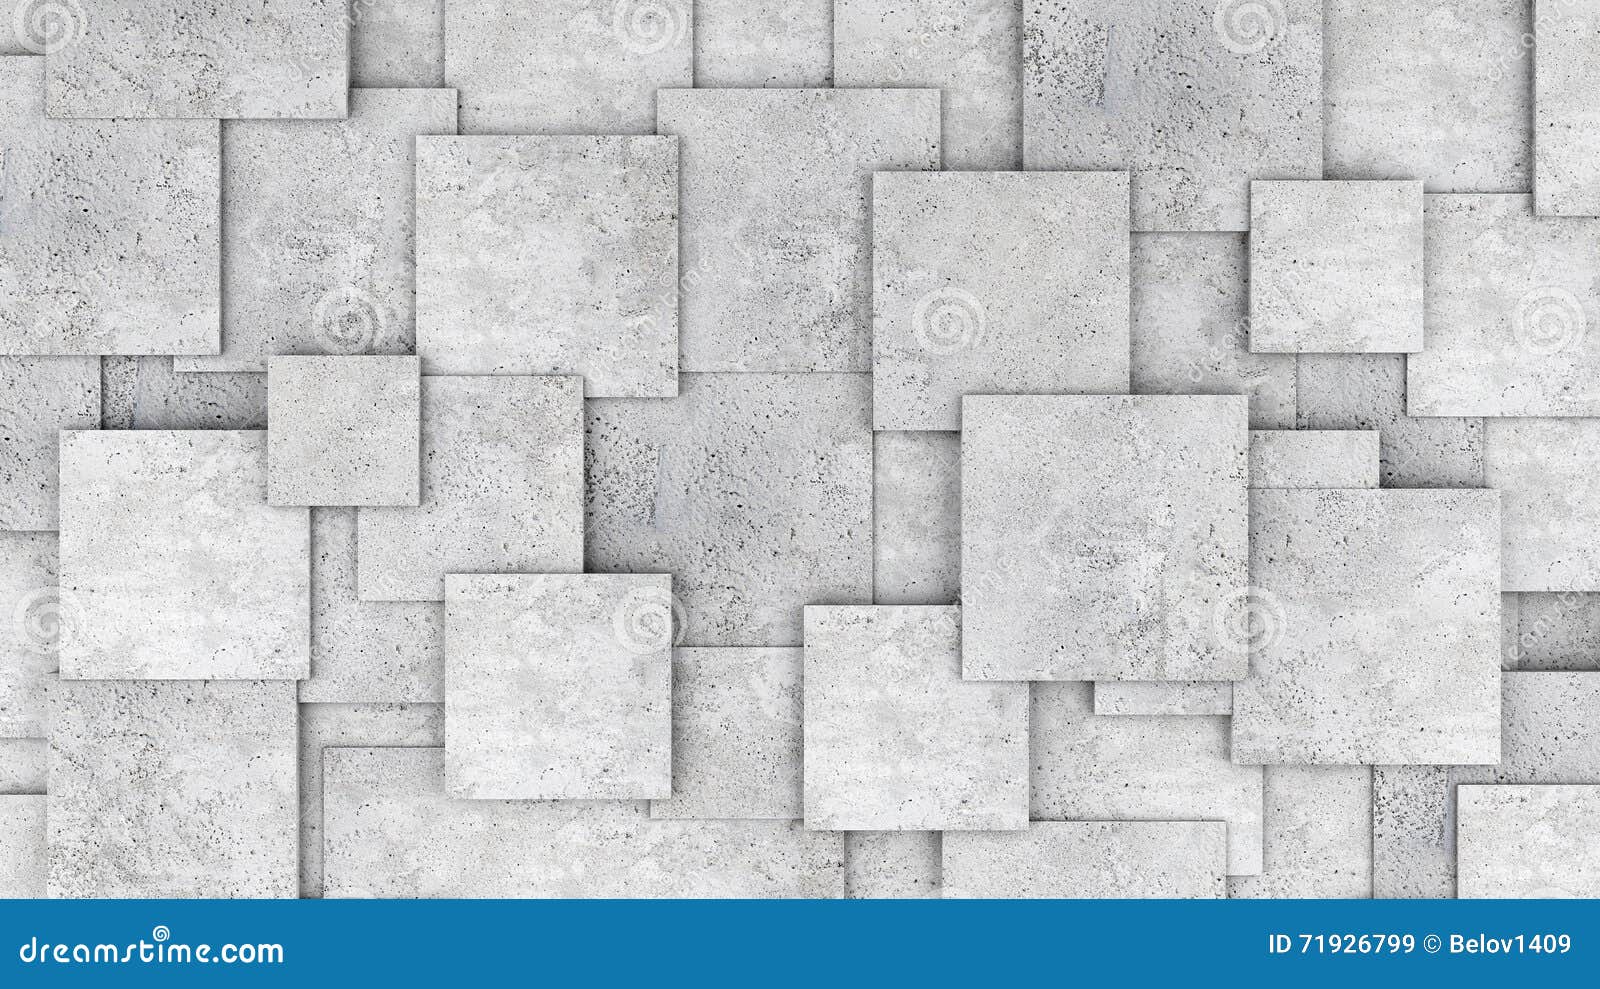 concrete 3d cube wall as background or wallpaper